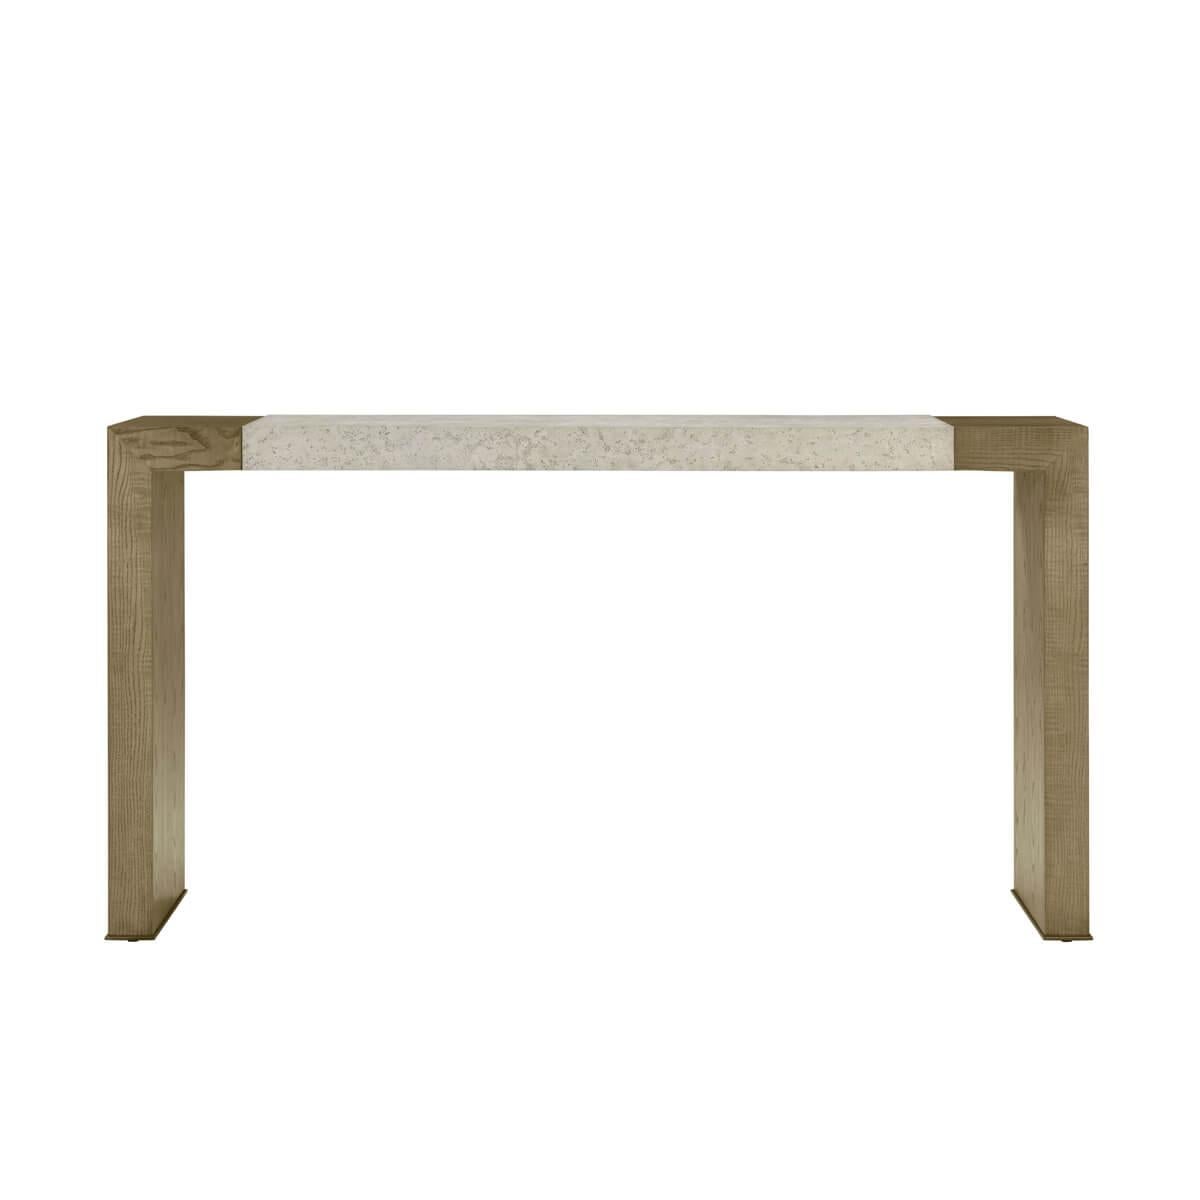 A modern parsons style console table made of figured ash in our light dune finish with our exclusive Mineral finished top and metal detail at the base of the legs in a bronze finish.

Dimensions: 66